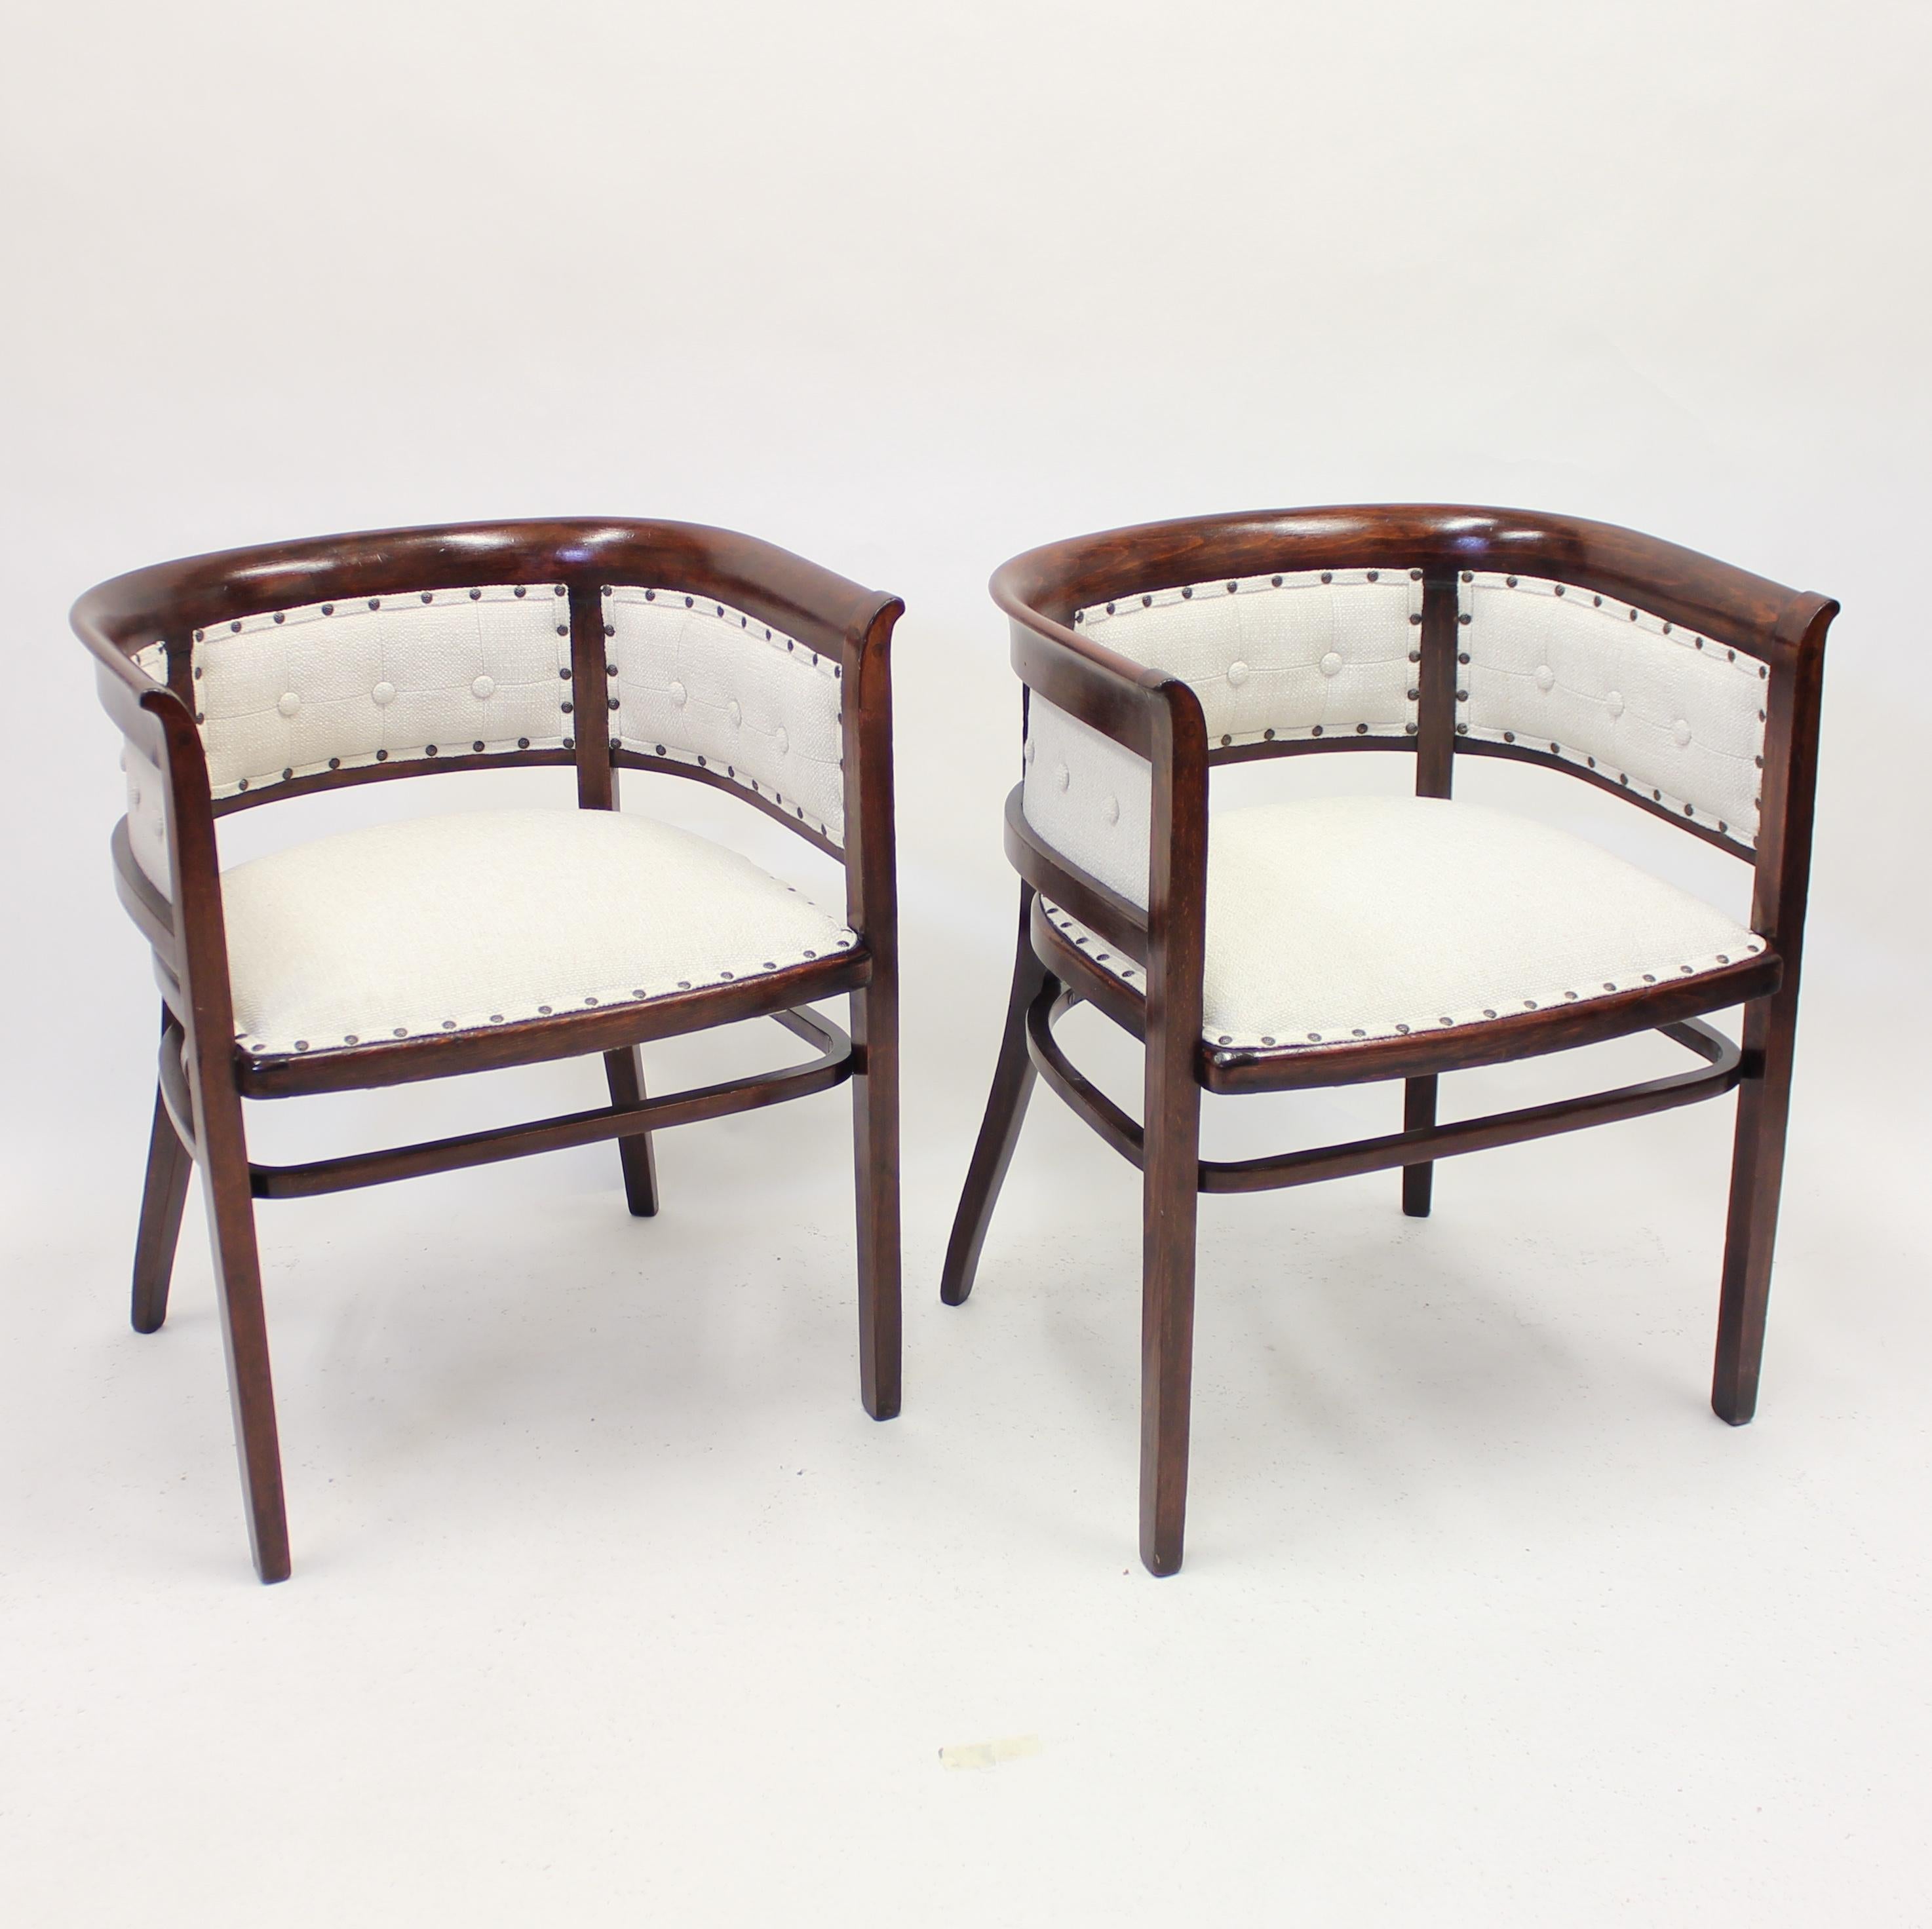 Vienna Secession Pair of Fischel Armchairs, in the Style of Josef Hoffmann, Early 20th Century For Sale